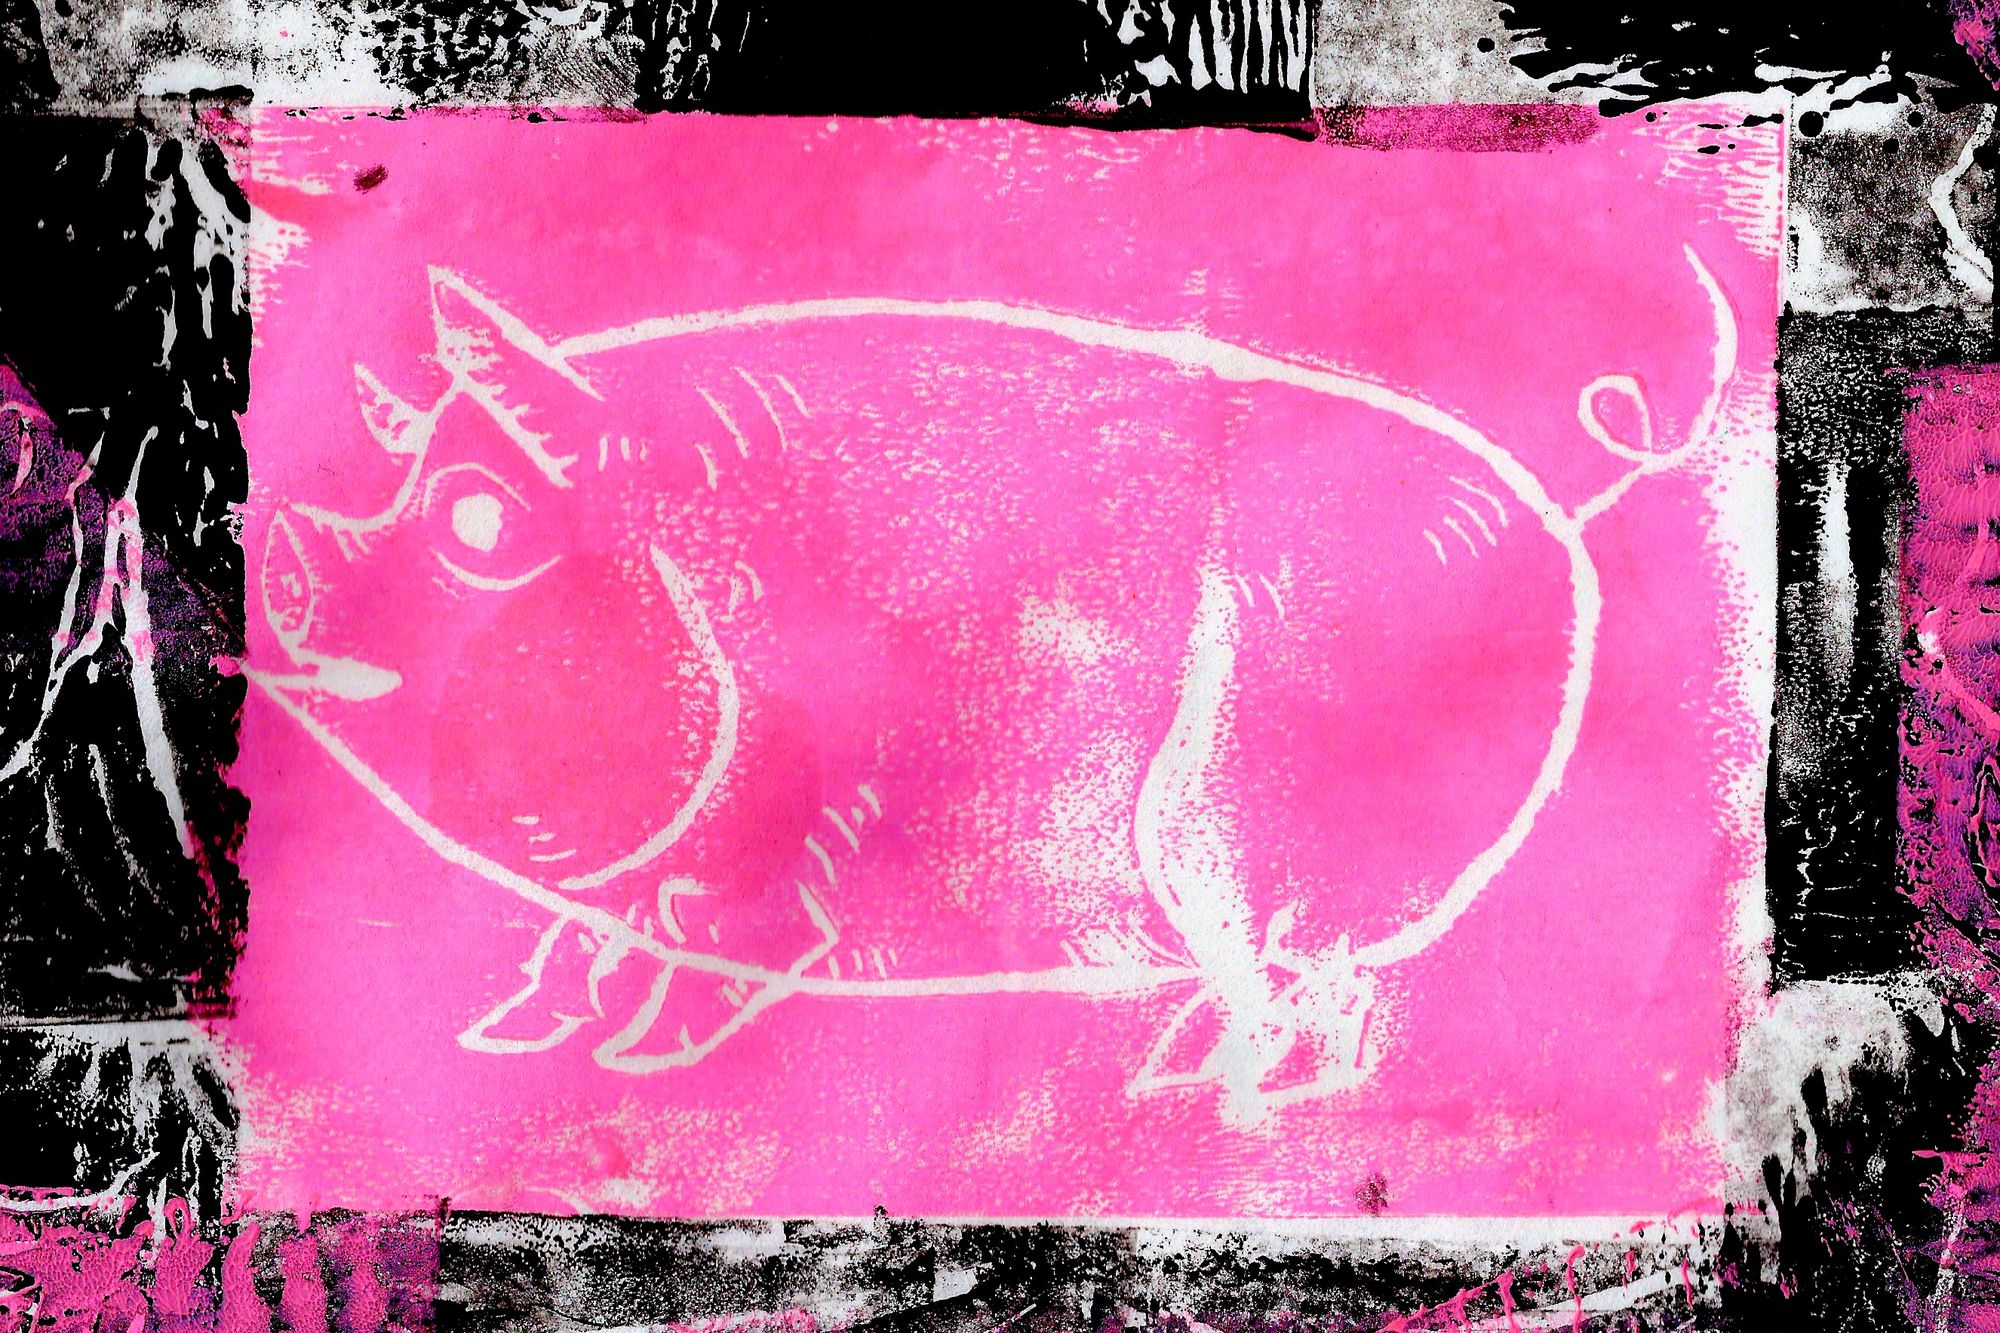 A block-printed image of a pig with pink ink and a black border with hash marks in the design.